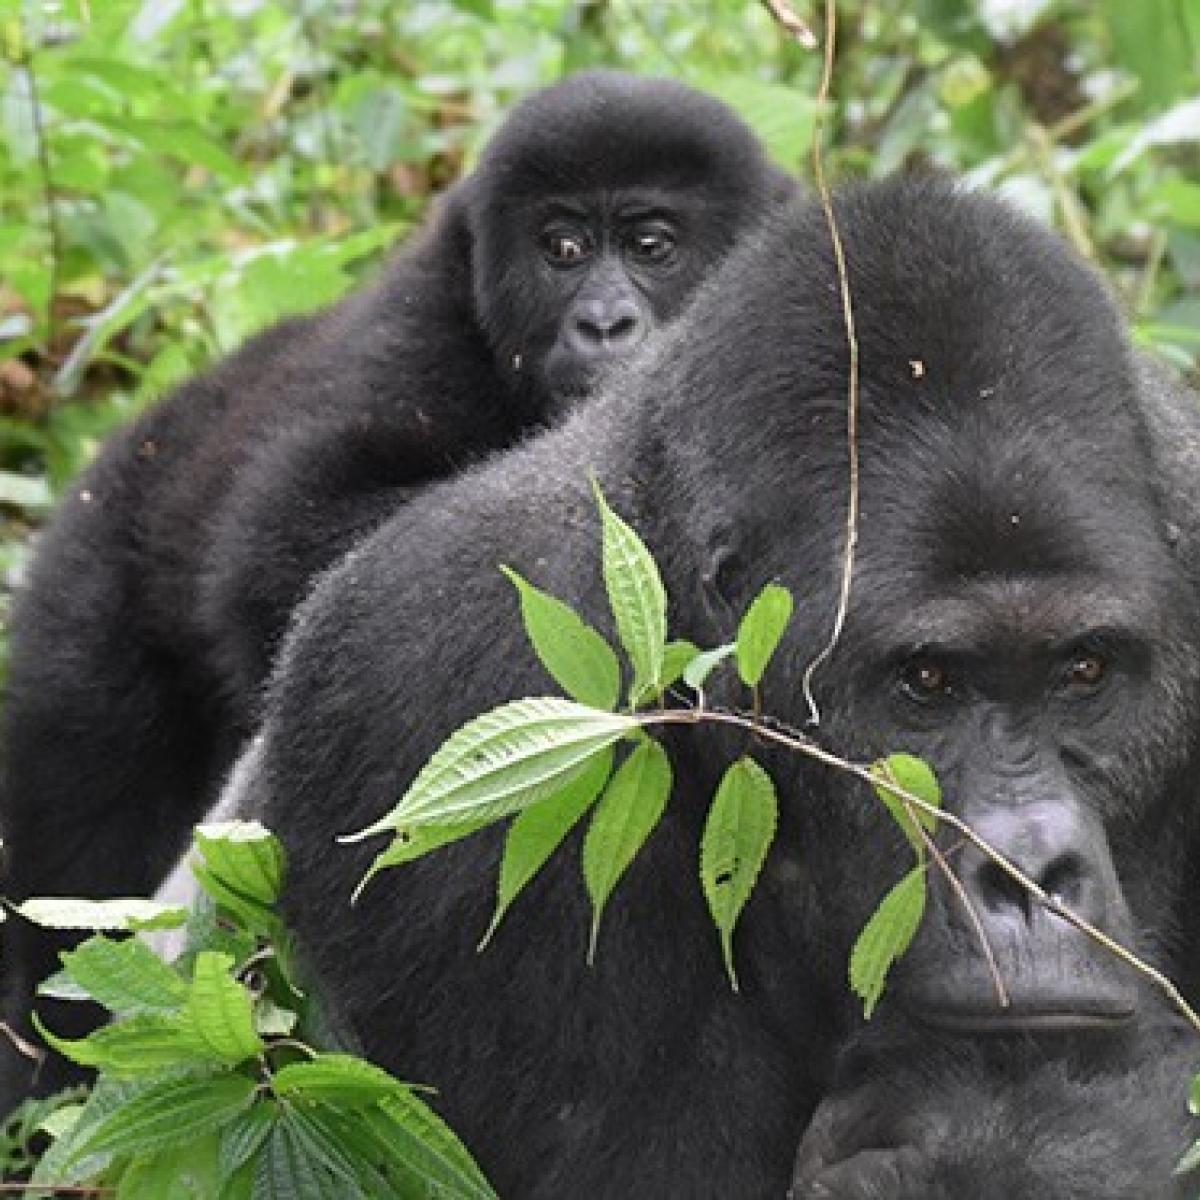 Gorillas are one of the many animals whose populations and habitats are better managed and protected through USAID’s work in Central Africa.